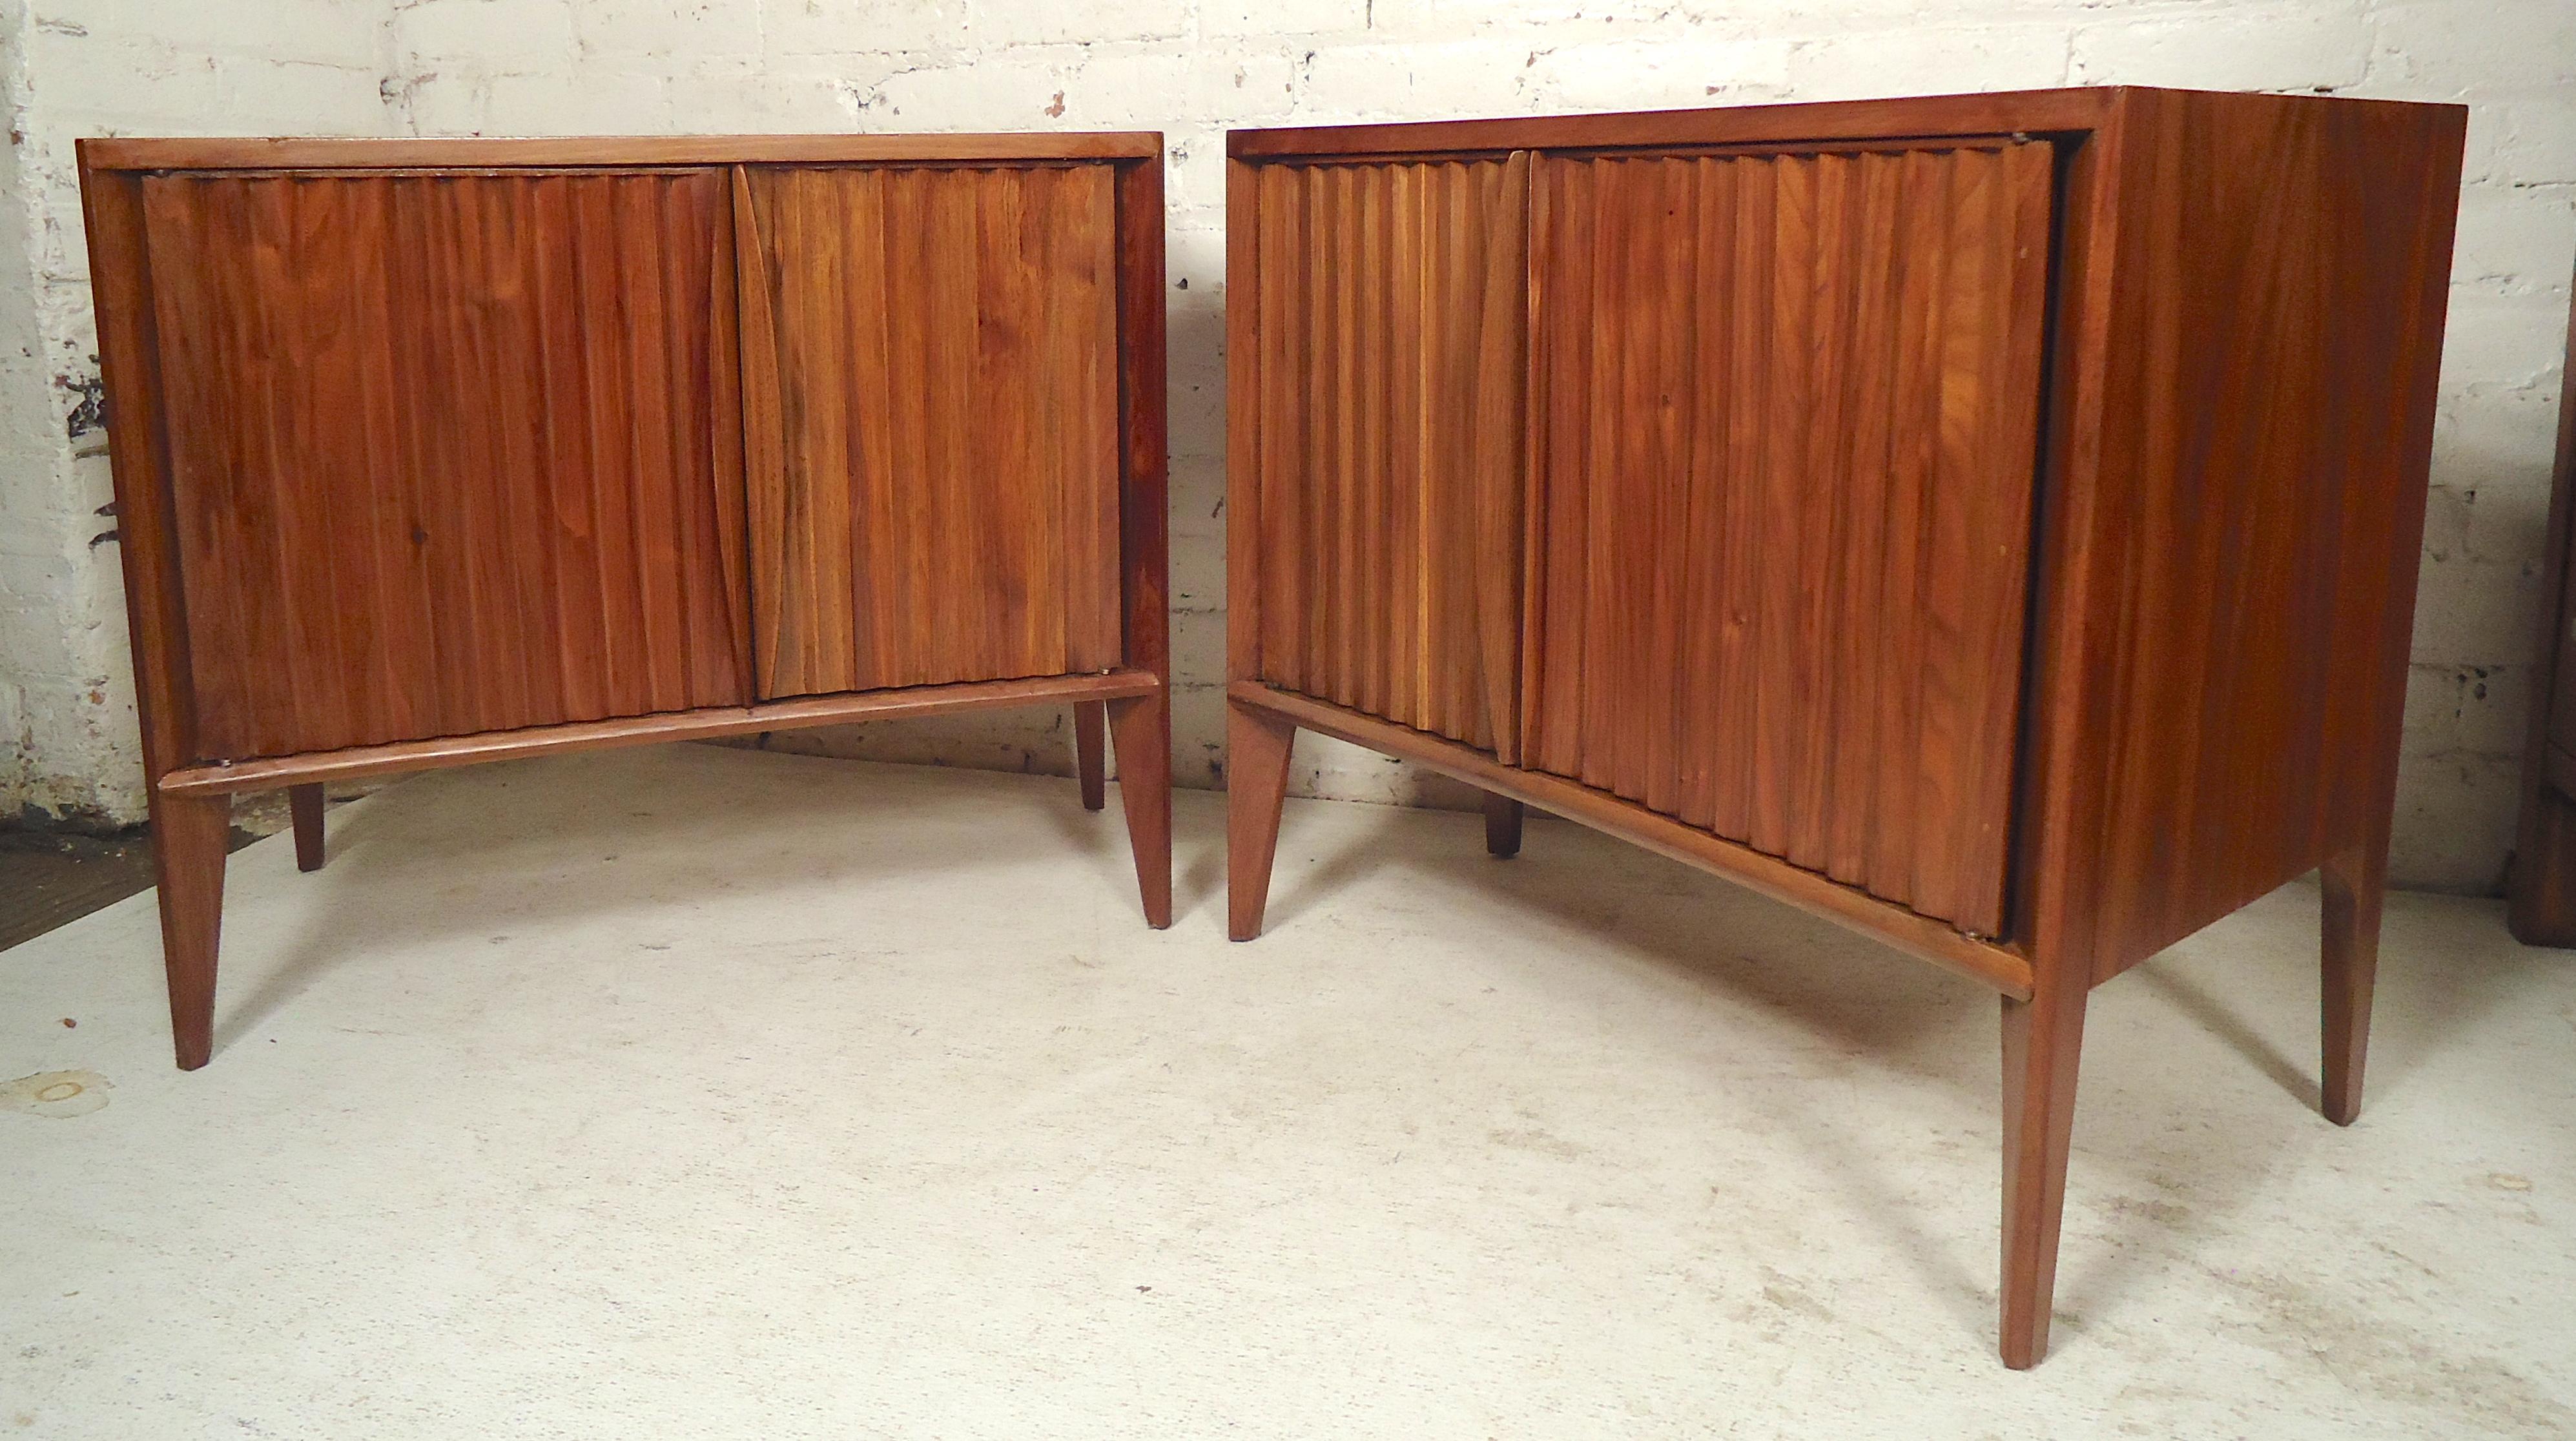 Pair of Mid-Century Modern side tables with double door storage.
(Please confirm item location - NY or NJ - with dealer).
  